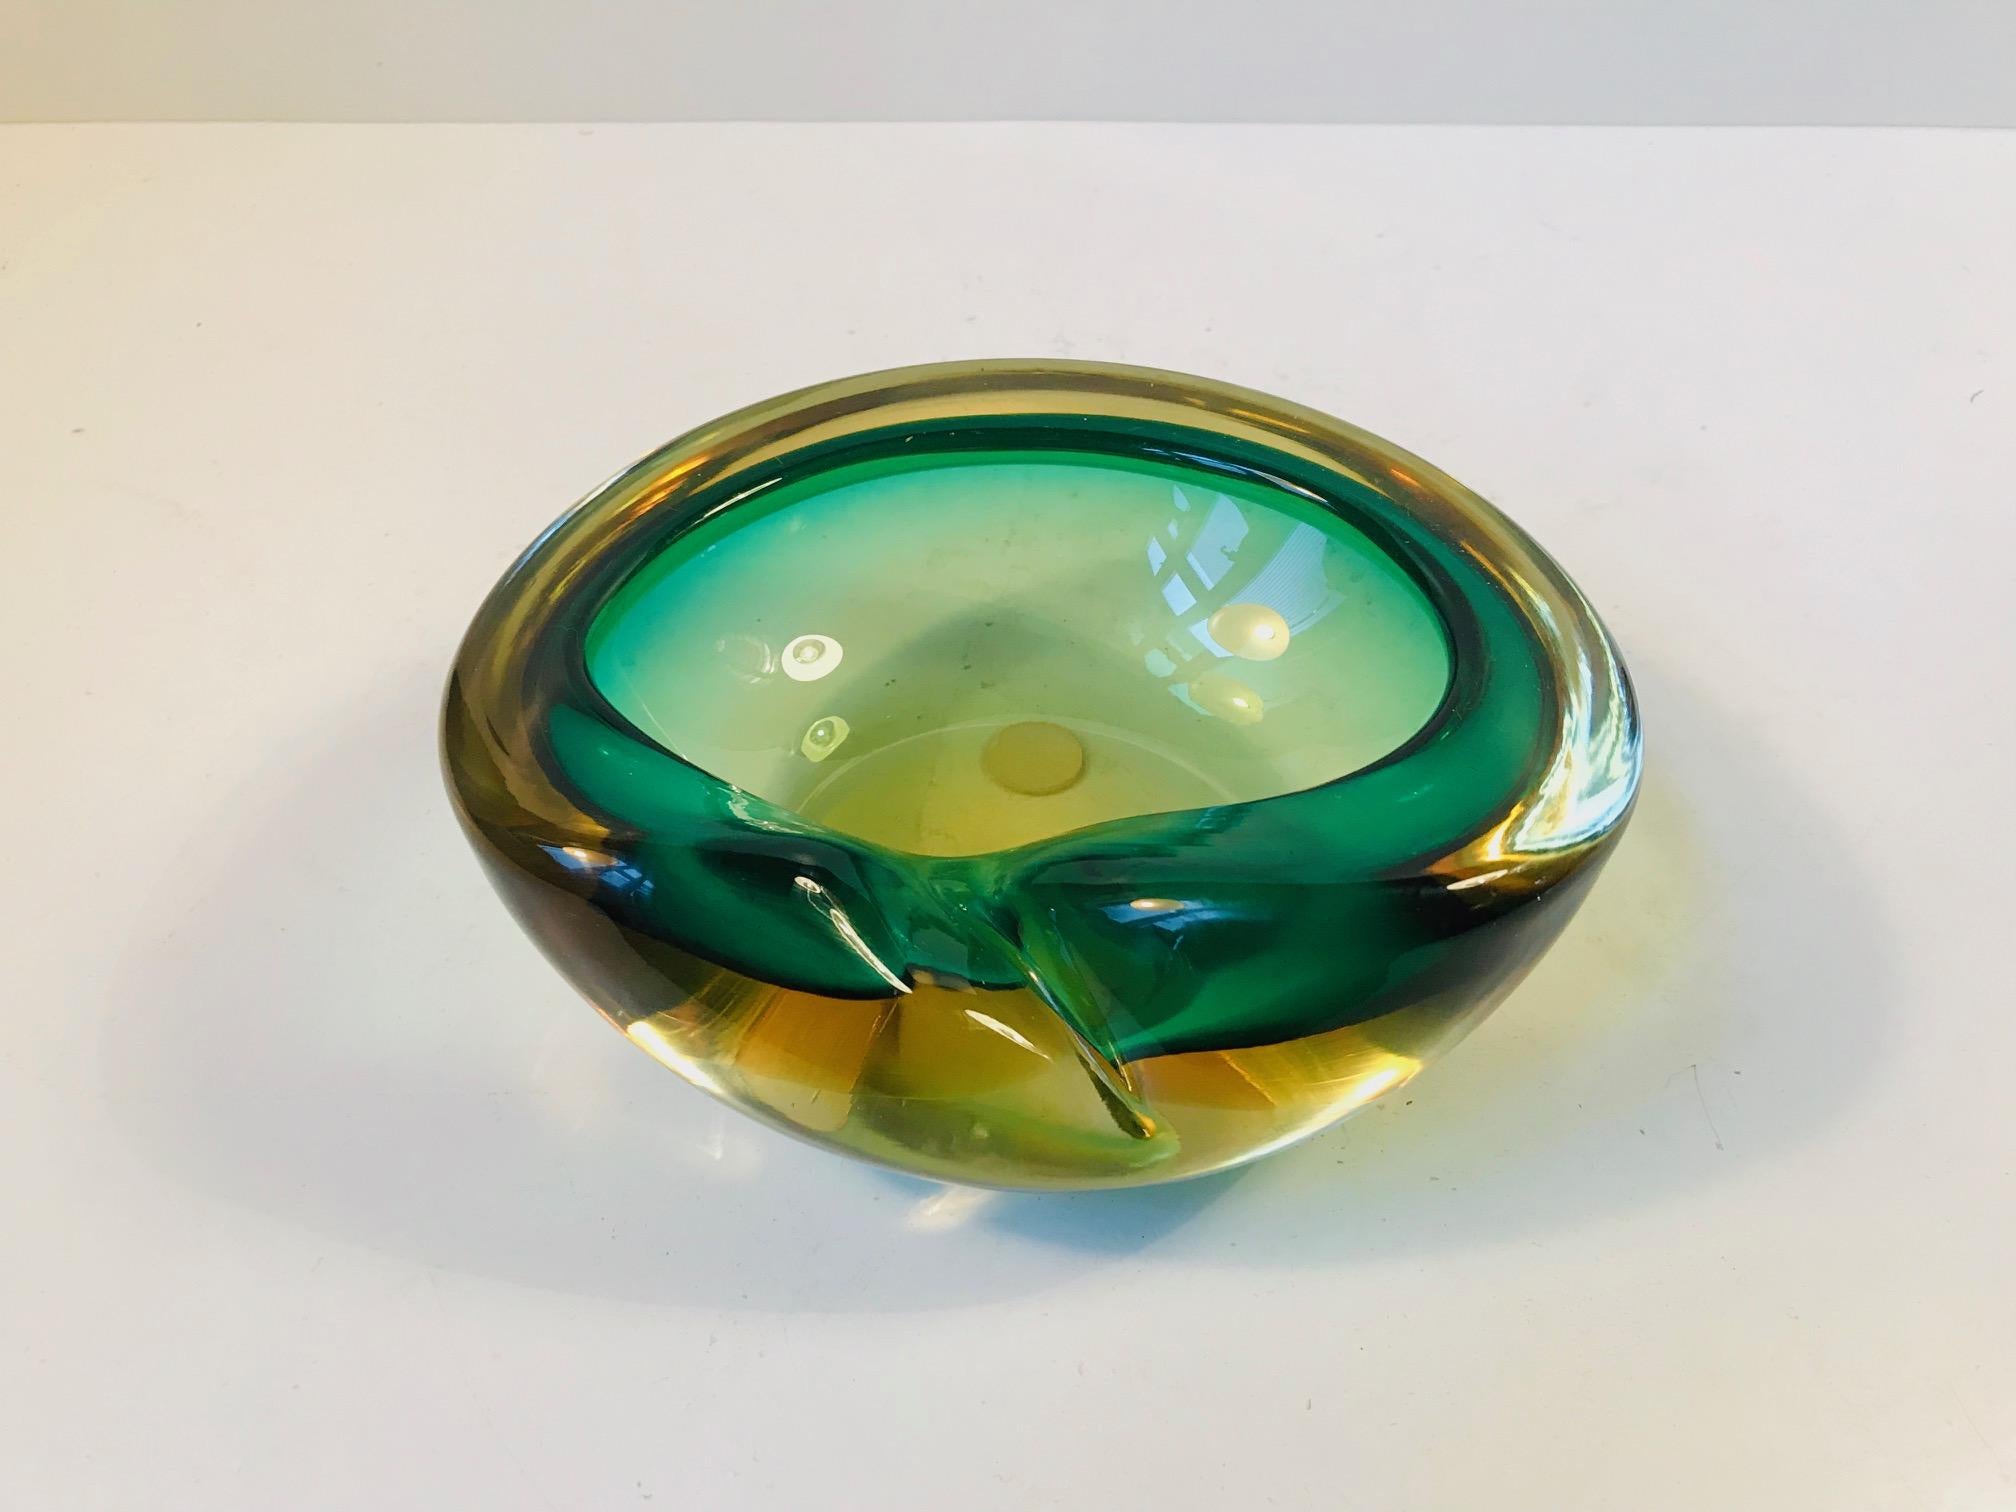 - A partially collapsed Sommerso bowl
- Made in green, yellow, and clear glass
- Made in Murano Italy during the late 1950s or early 1960s.